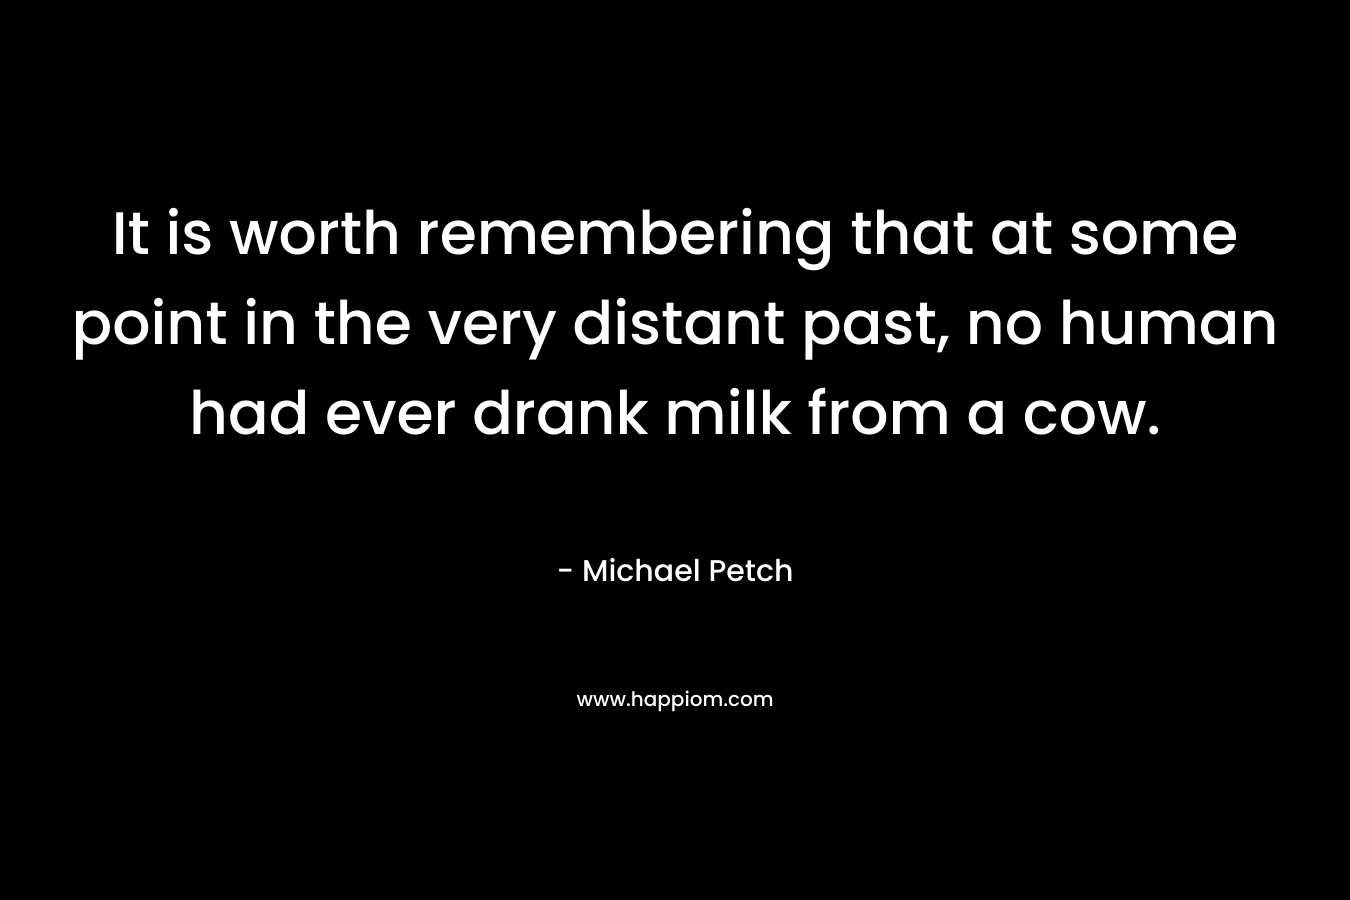 It is worth remembering that at some point in the very distant past, no human had ever drank milk from a cow.